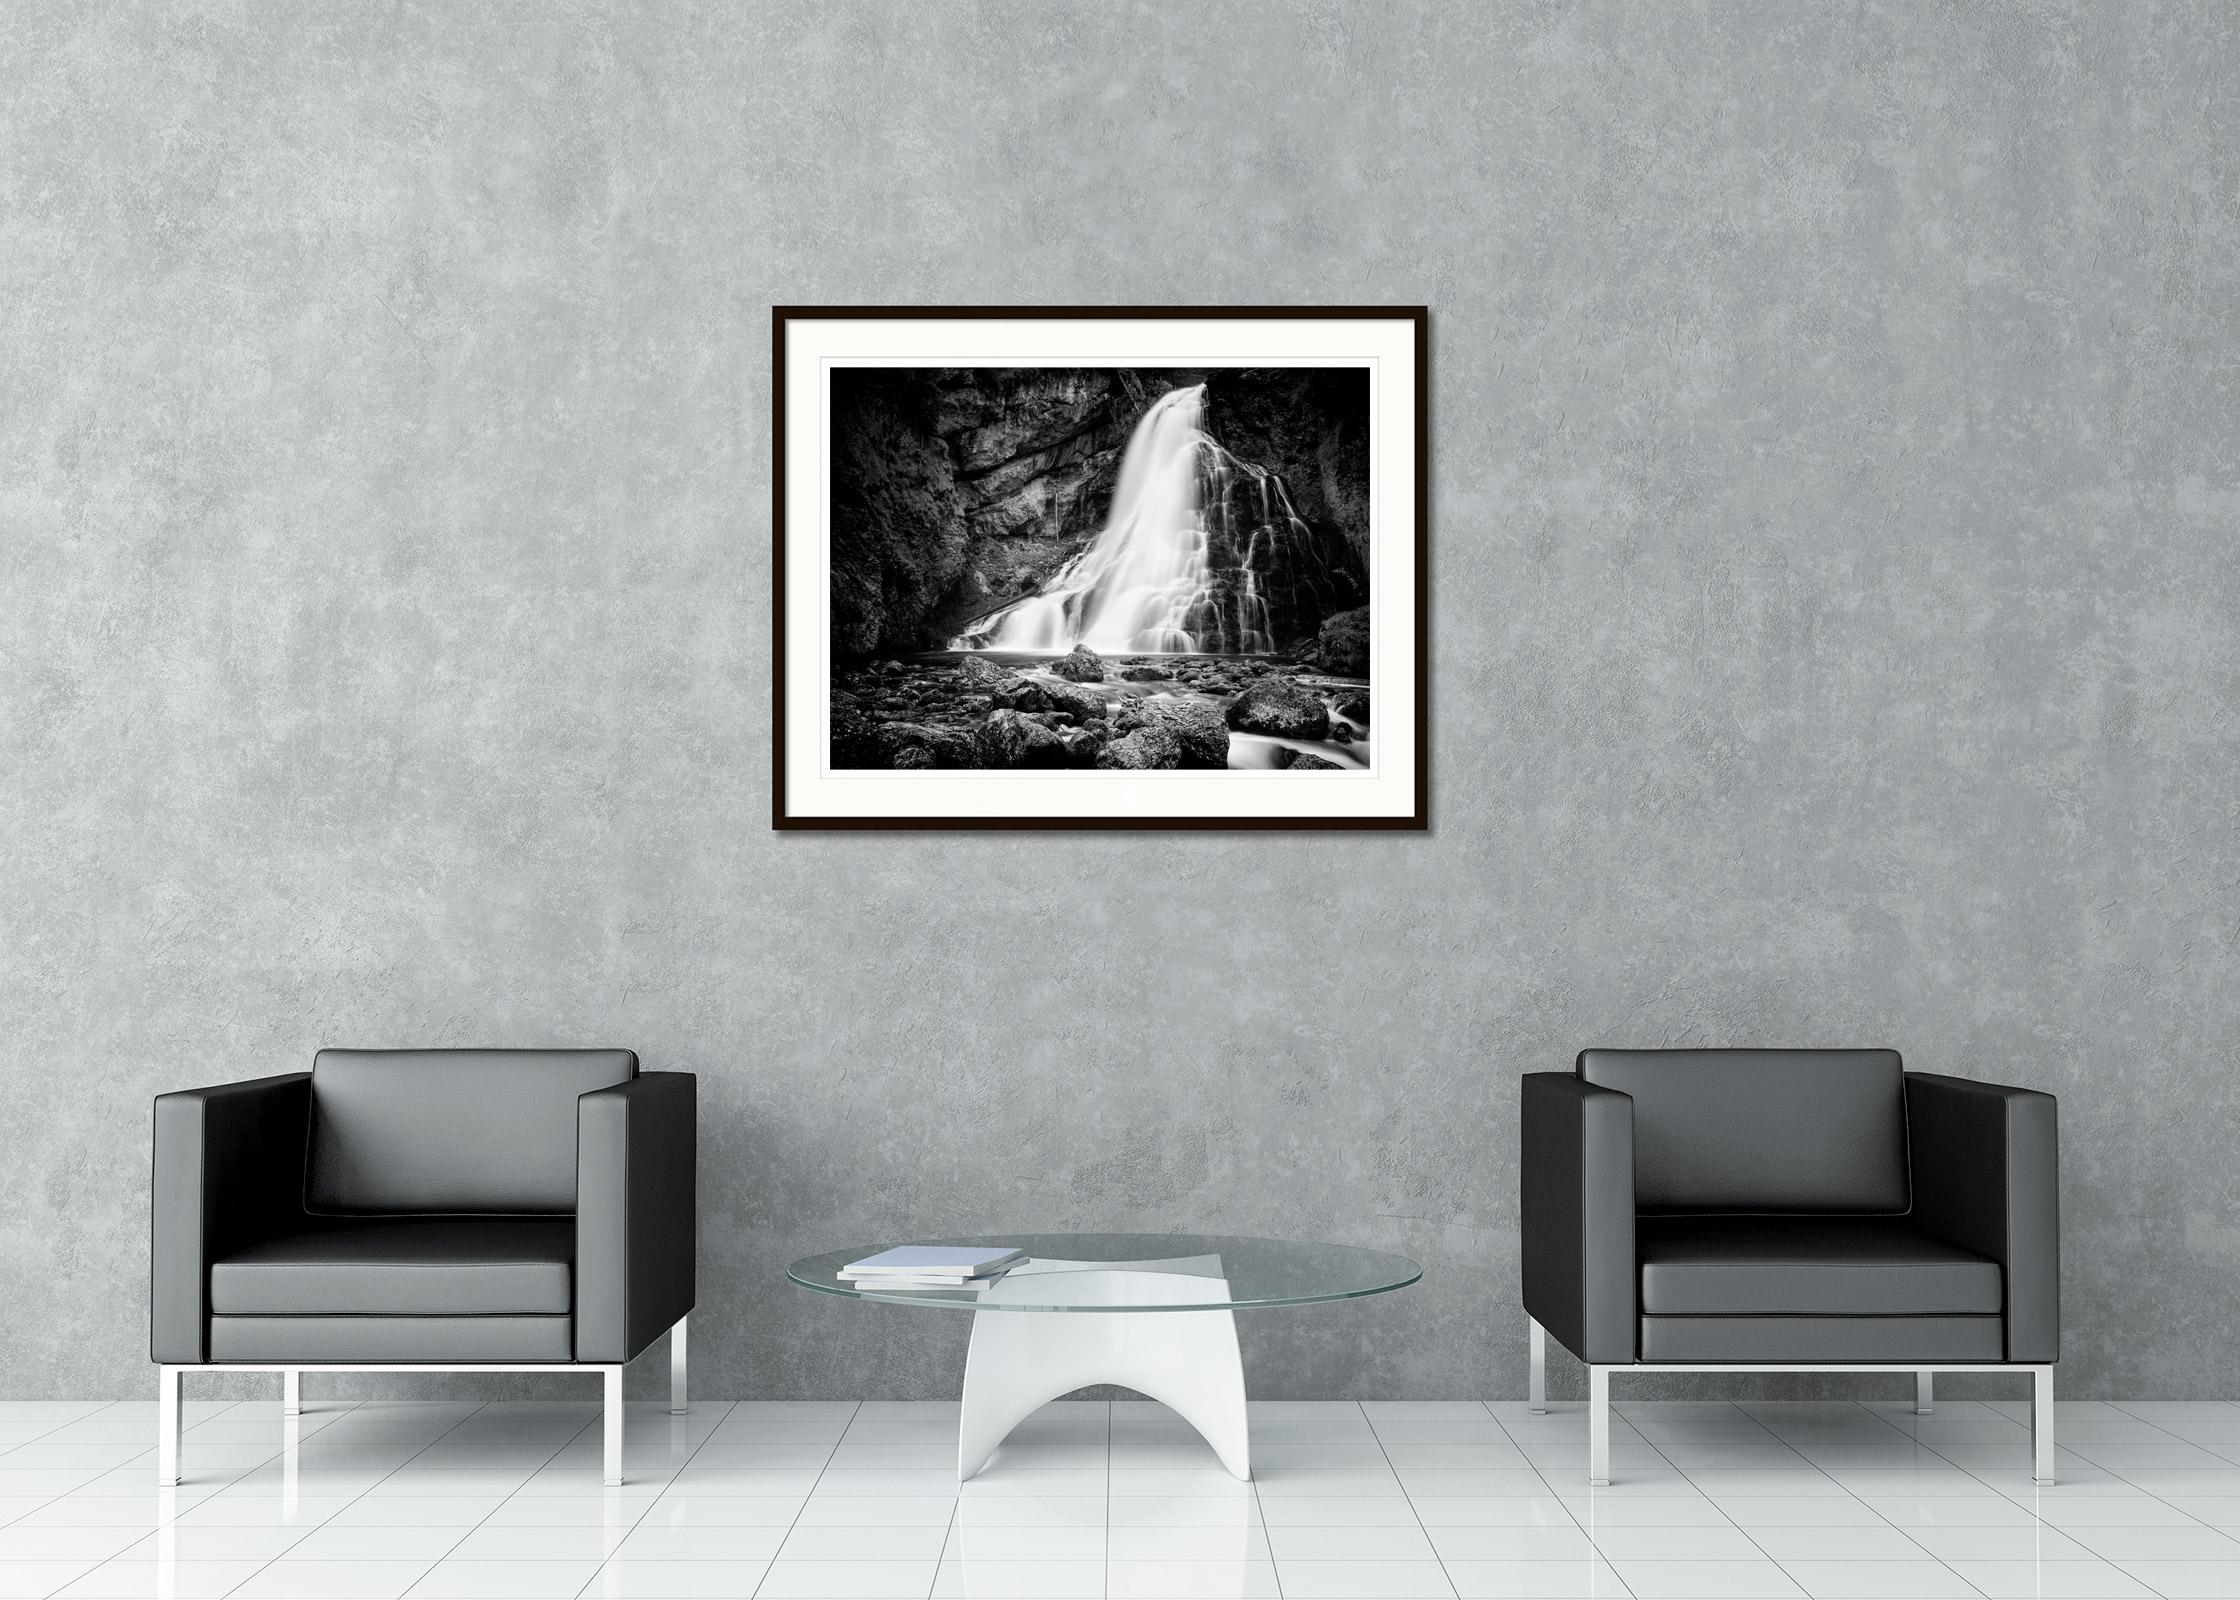 Black and white fine art long exposure waterscape - landscape photography. Archival pigment ink print as part of a limited edition of 8. All Gerald Berghammer prints are made to order in limited editions on Hahnemuehle Photo Rag Baryta. Each print